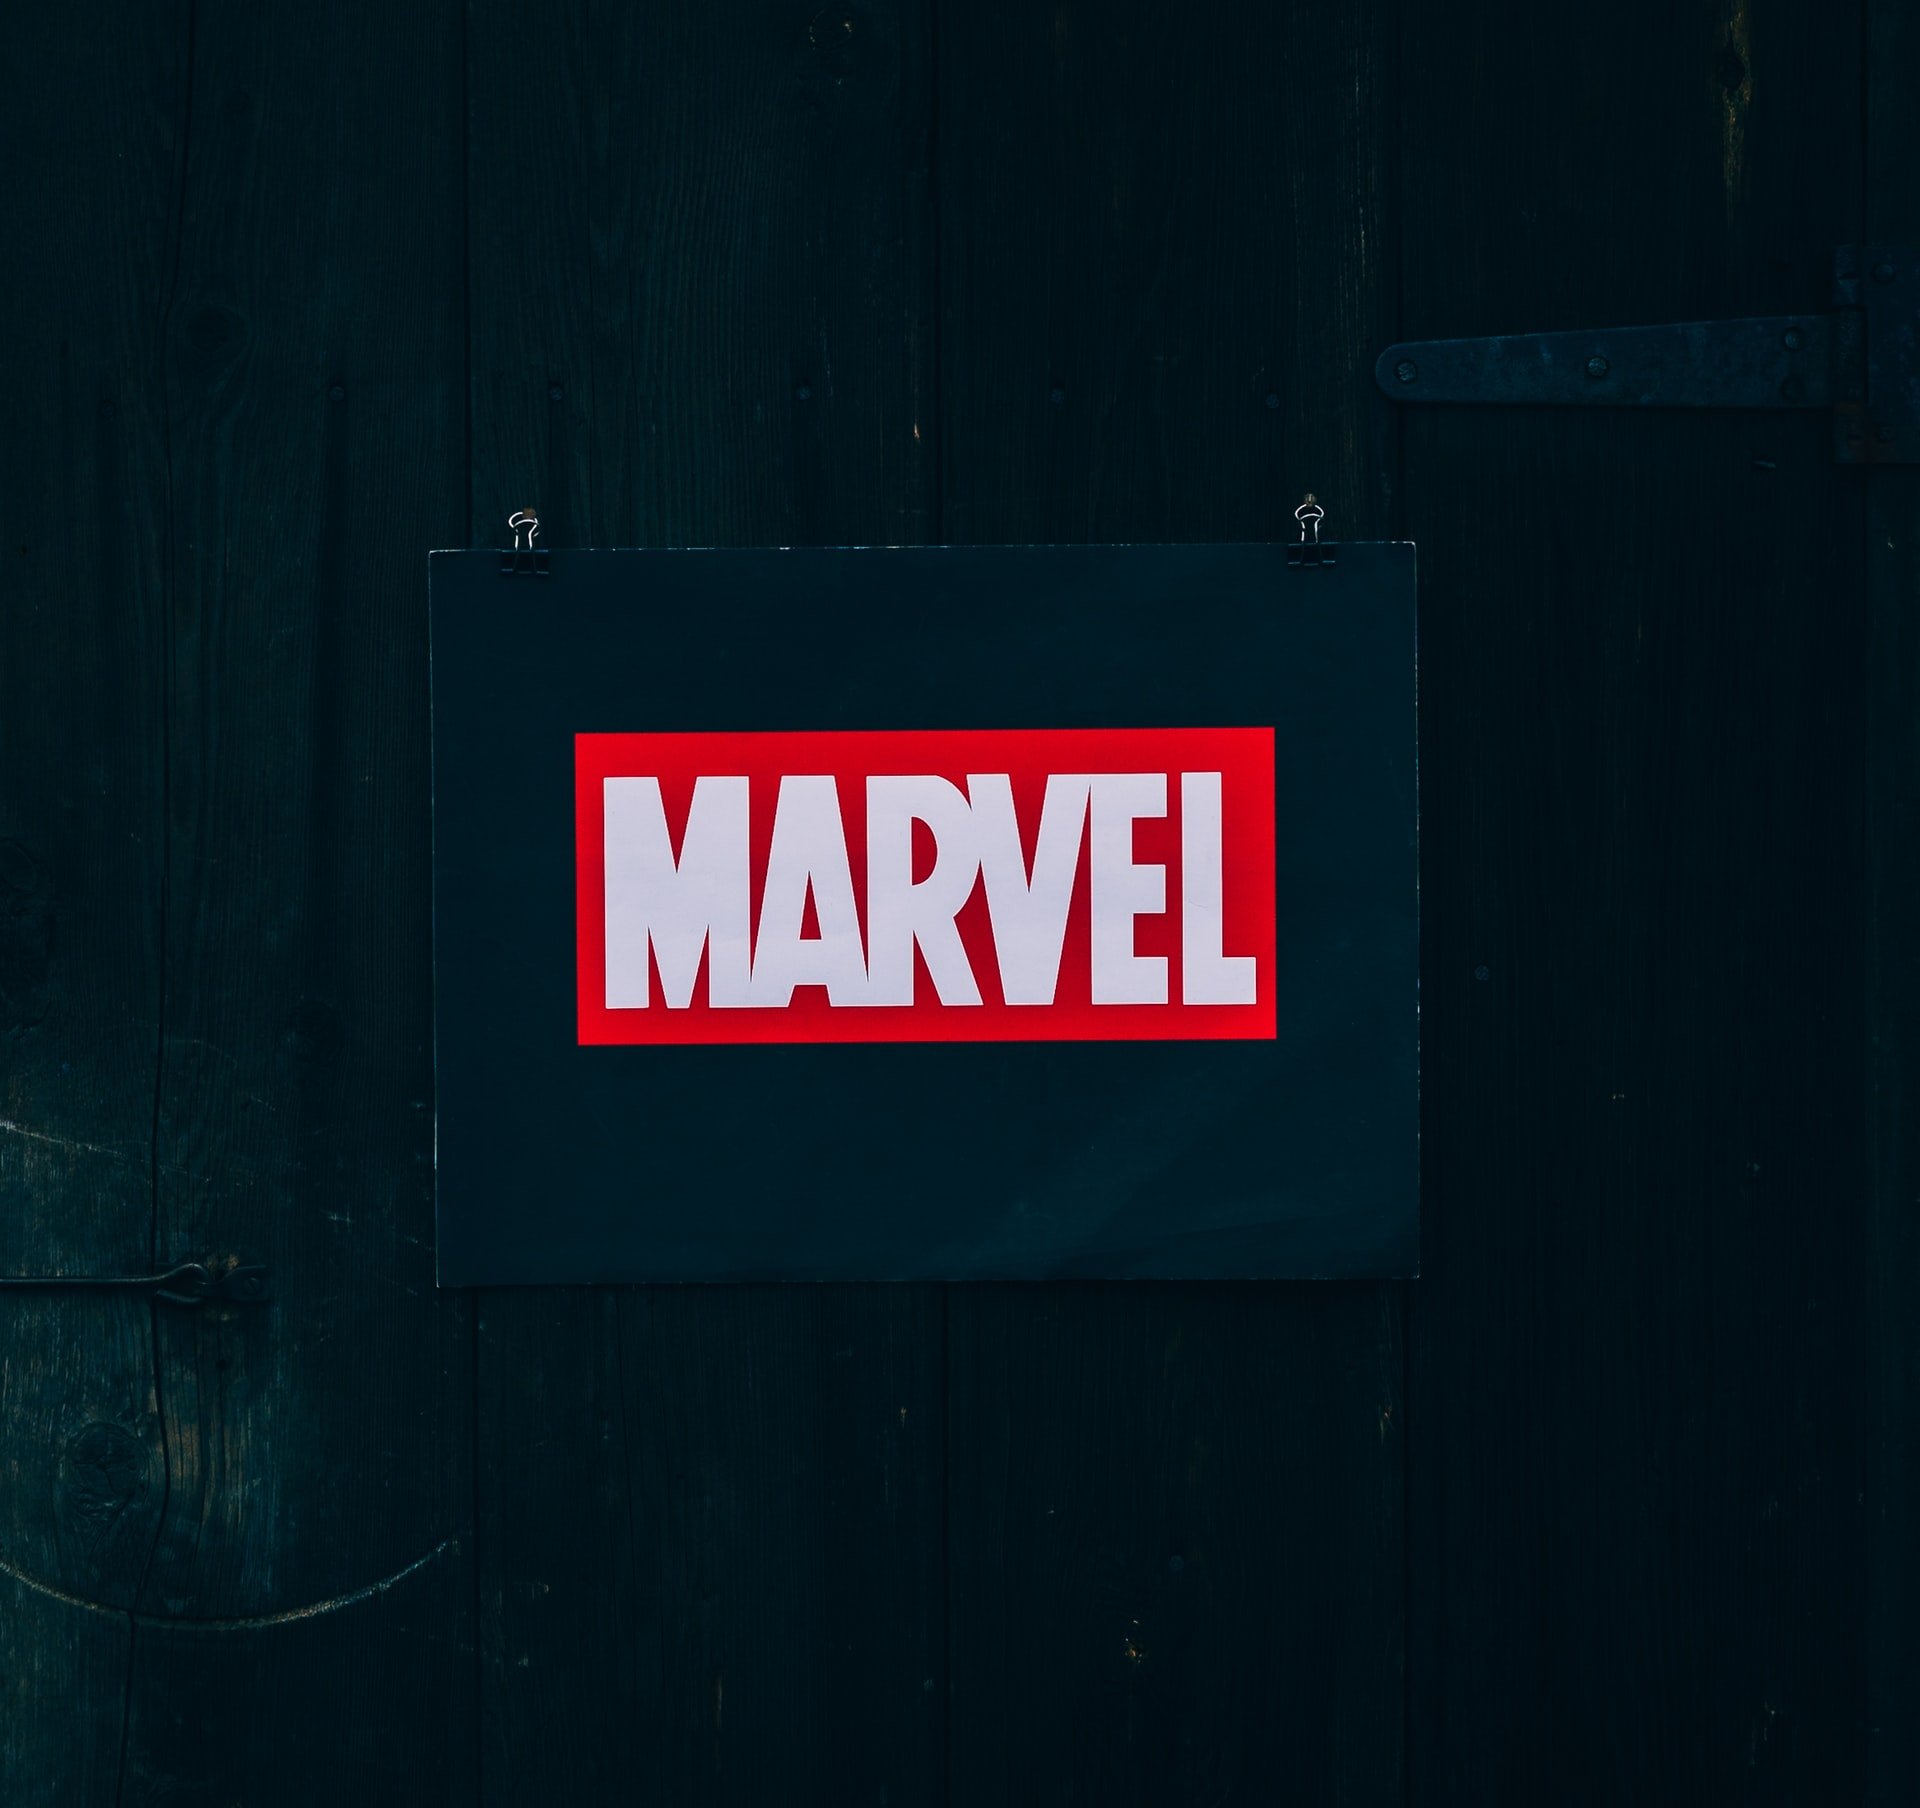 How to Audition for Marvel Auditioning for Superhero Films